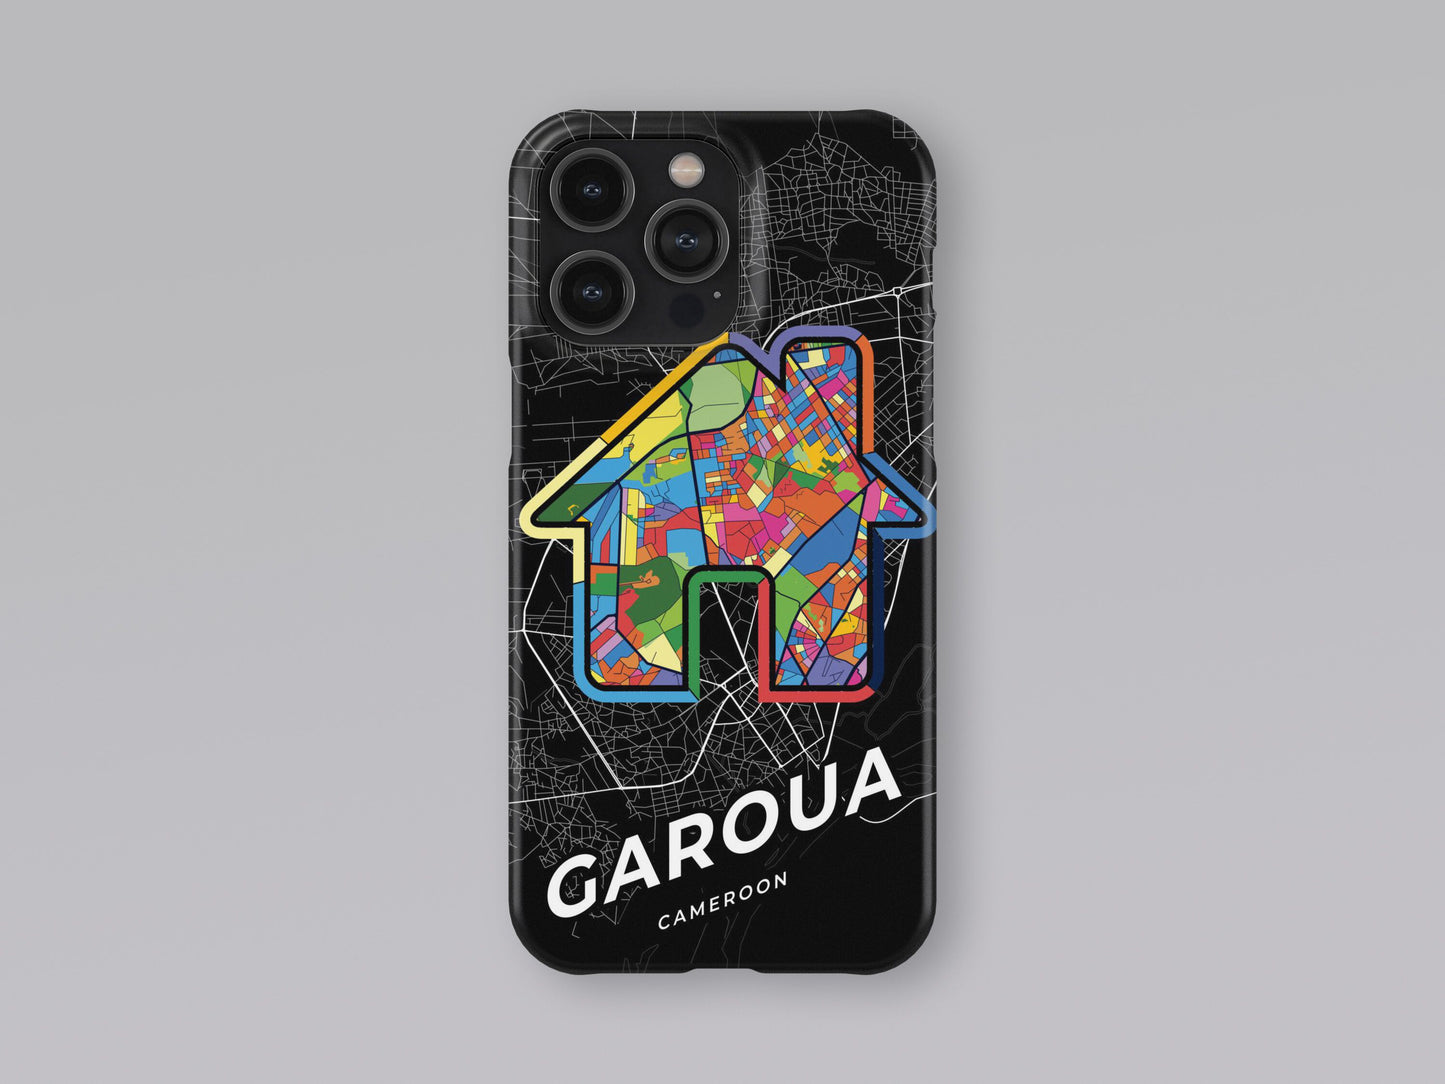 Garoua Cameroon slim phone case with colorful icon. Birthday, wedding or housewarming gift. Couple match cases. 3